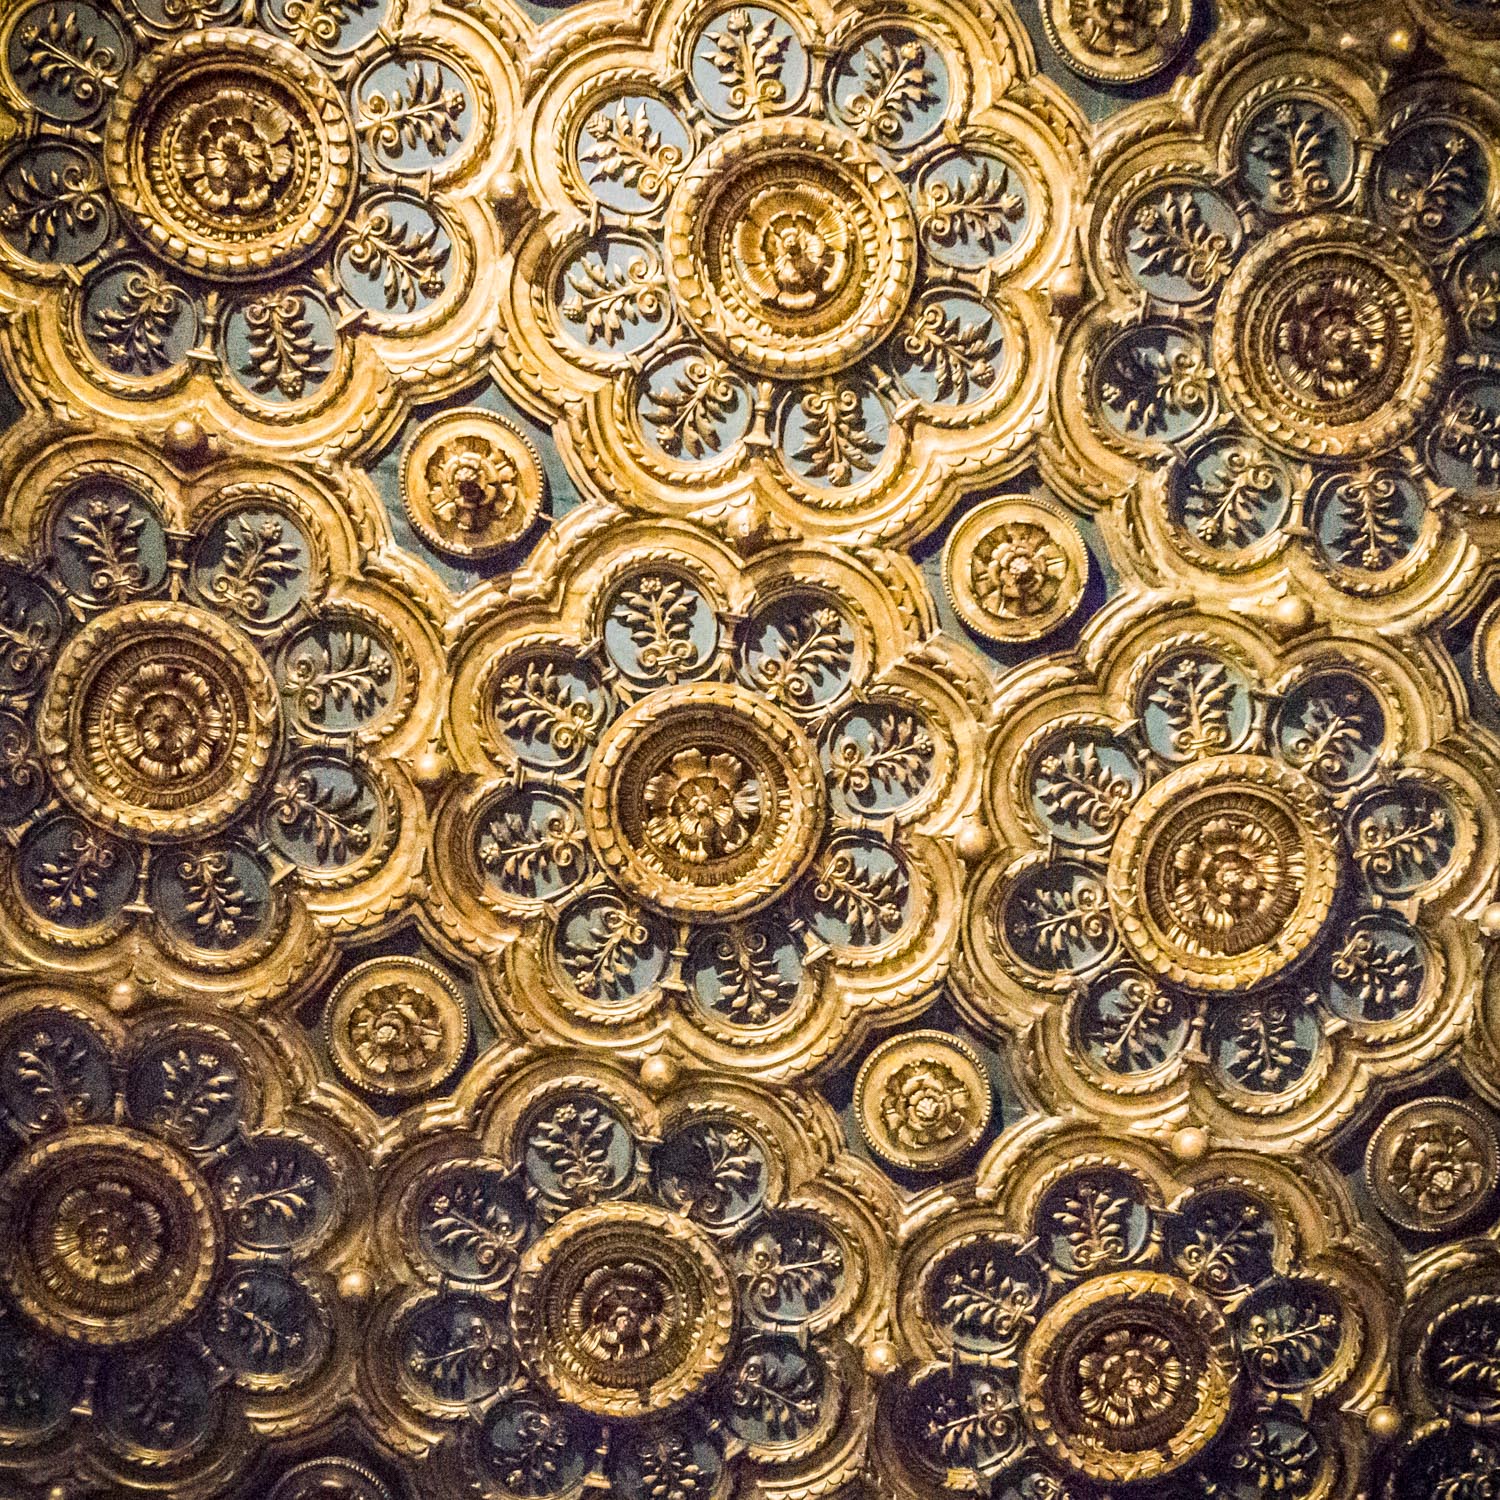 Saturday in Venice – Ceilings and walls